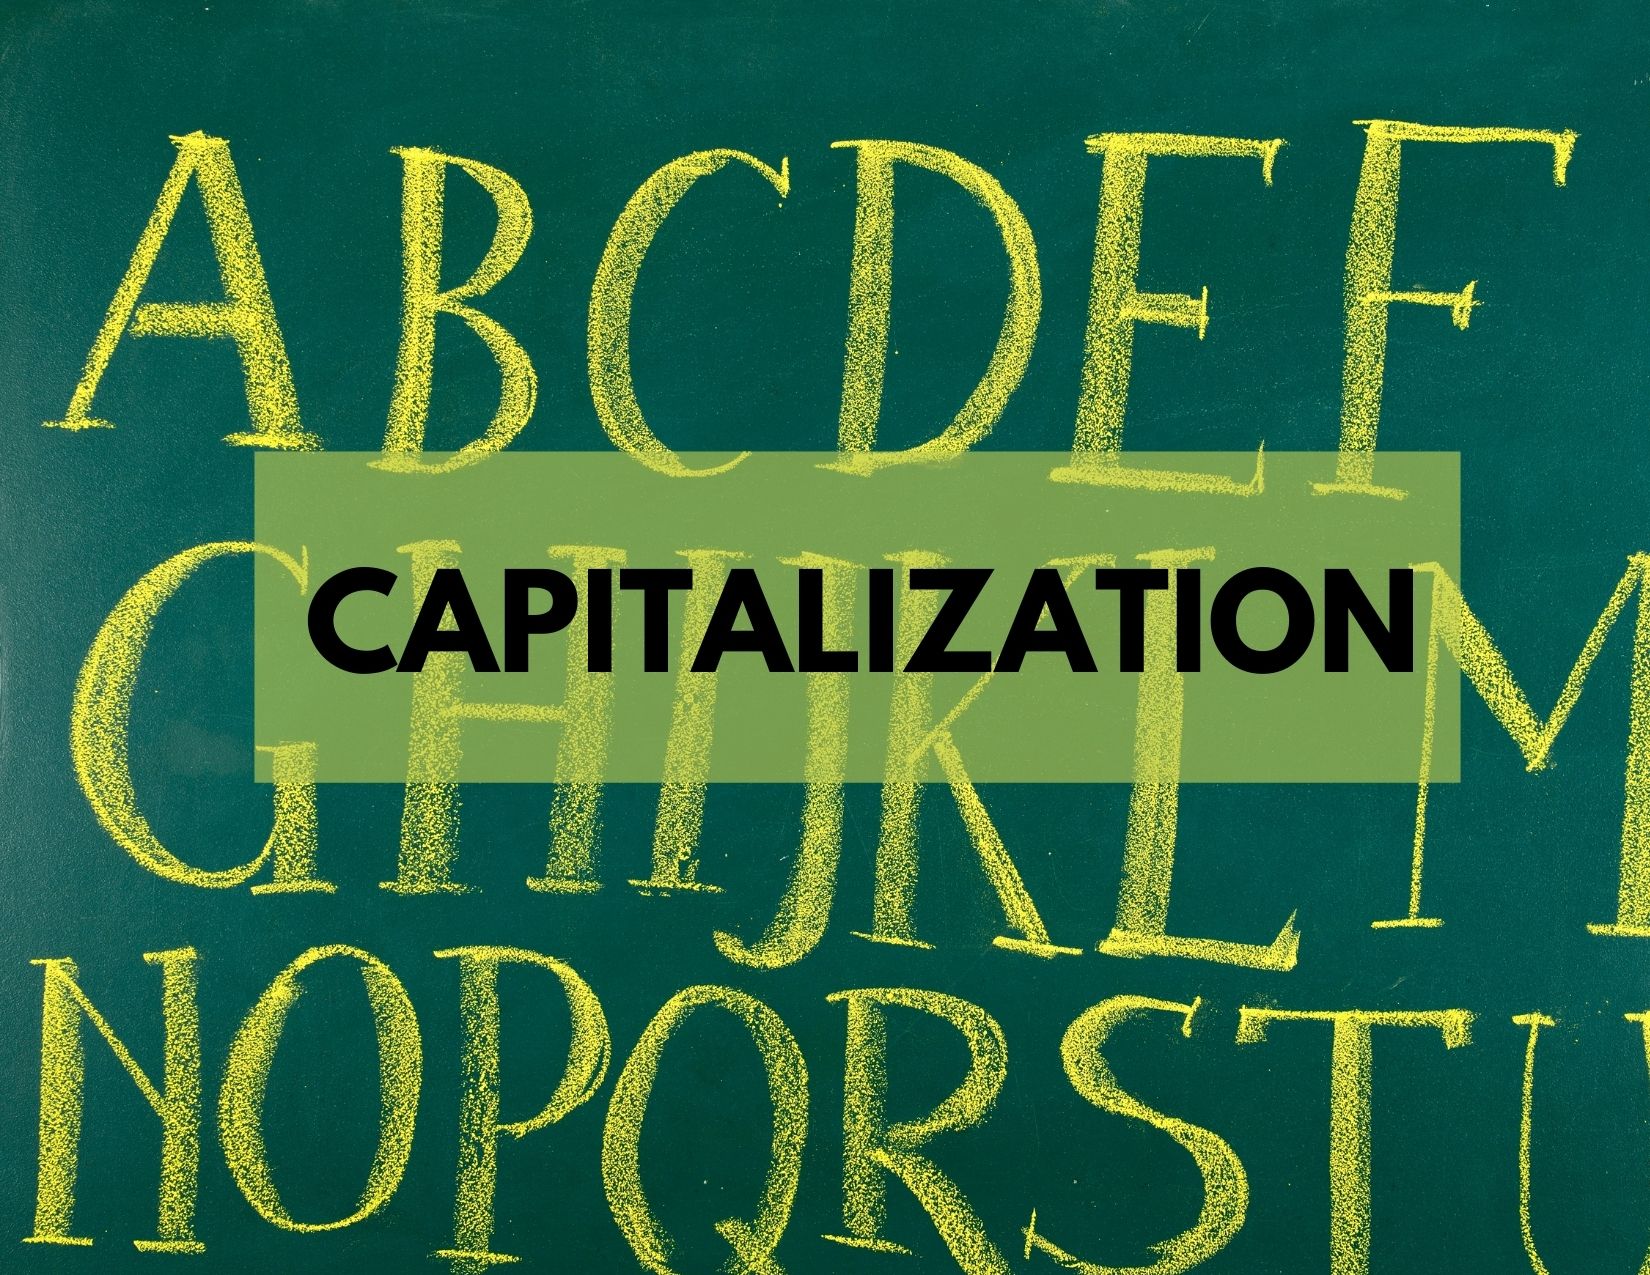 A graphic showing capital letters with the caption "Capitalization in Business Writing"